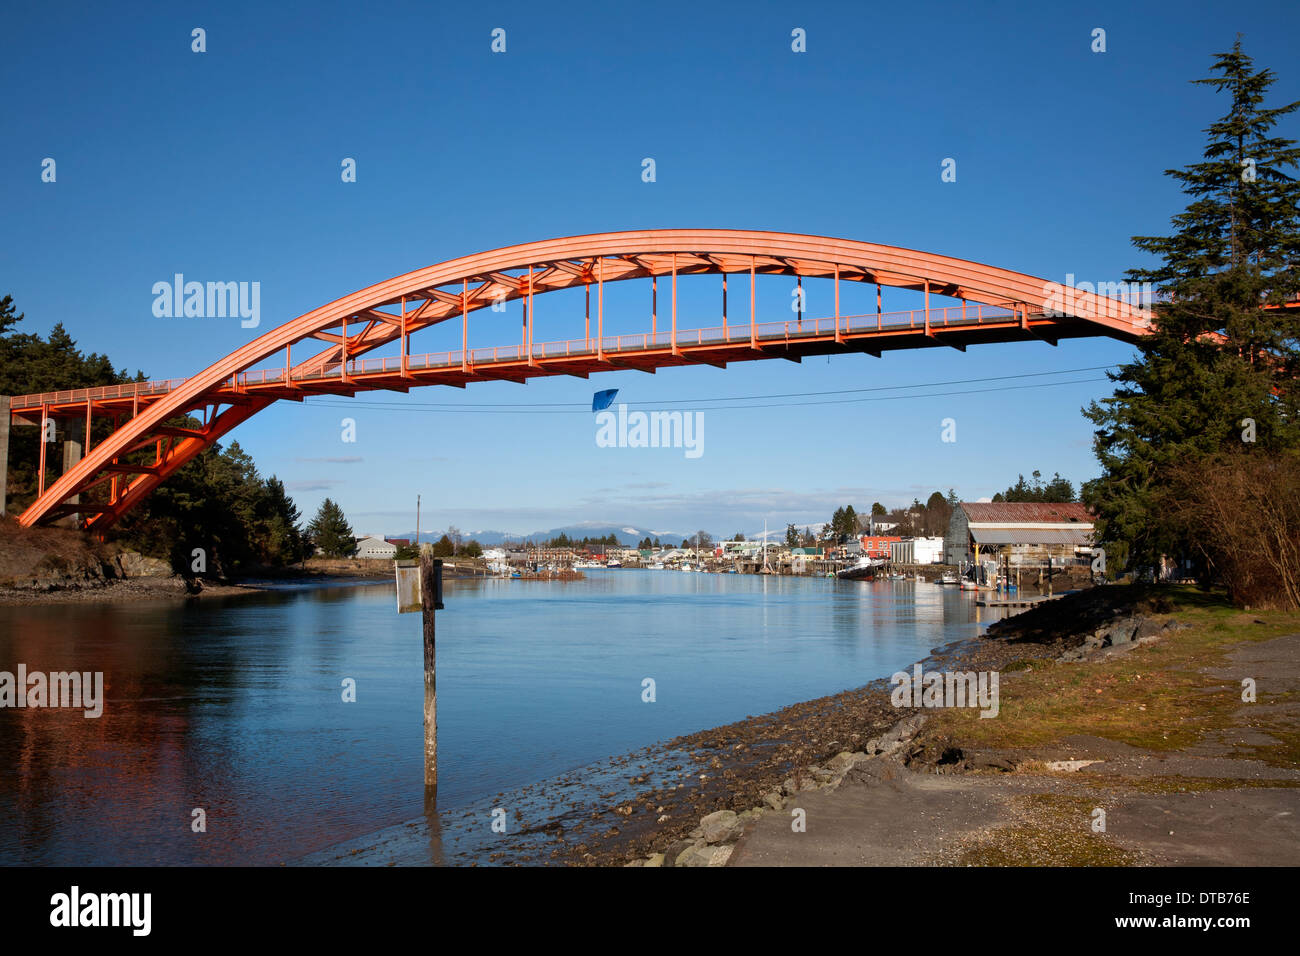 WASHINGTON - Bridge over the Swinomish Channel and the town of La Conner located on the Skagit River Delta. Stock Photo